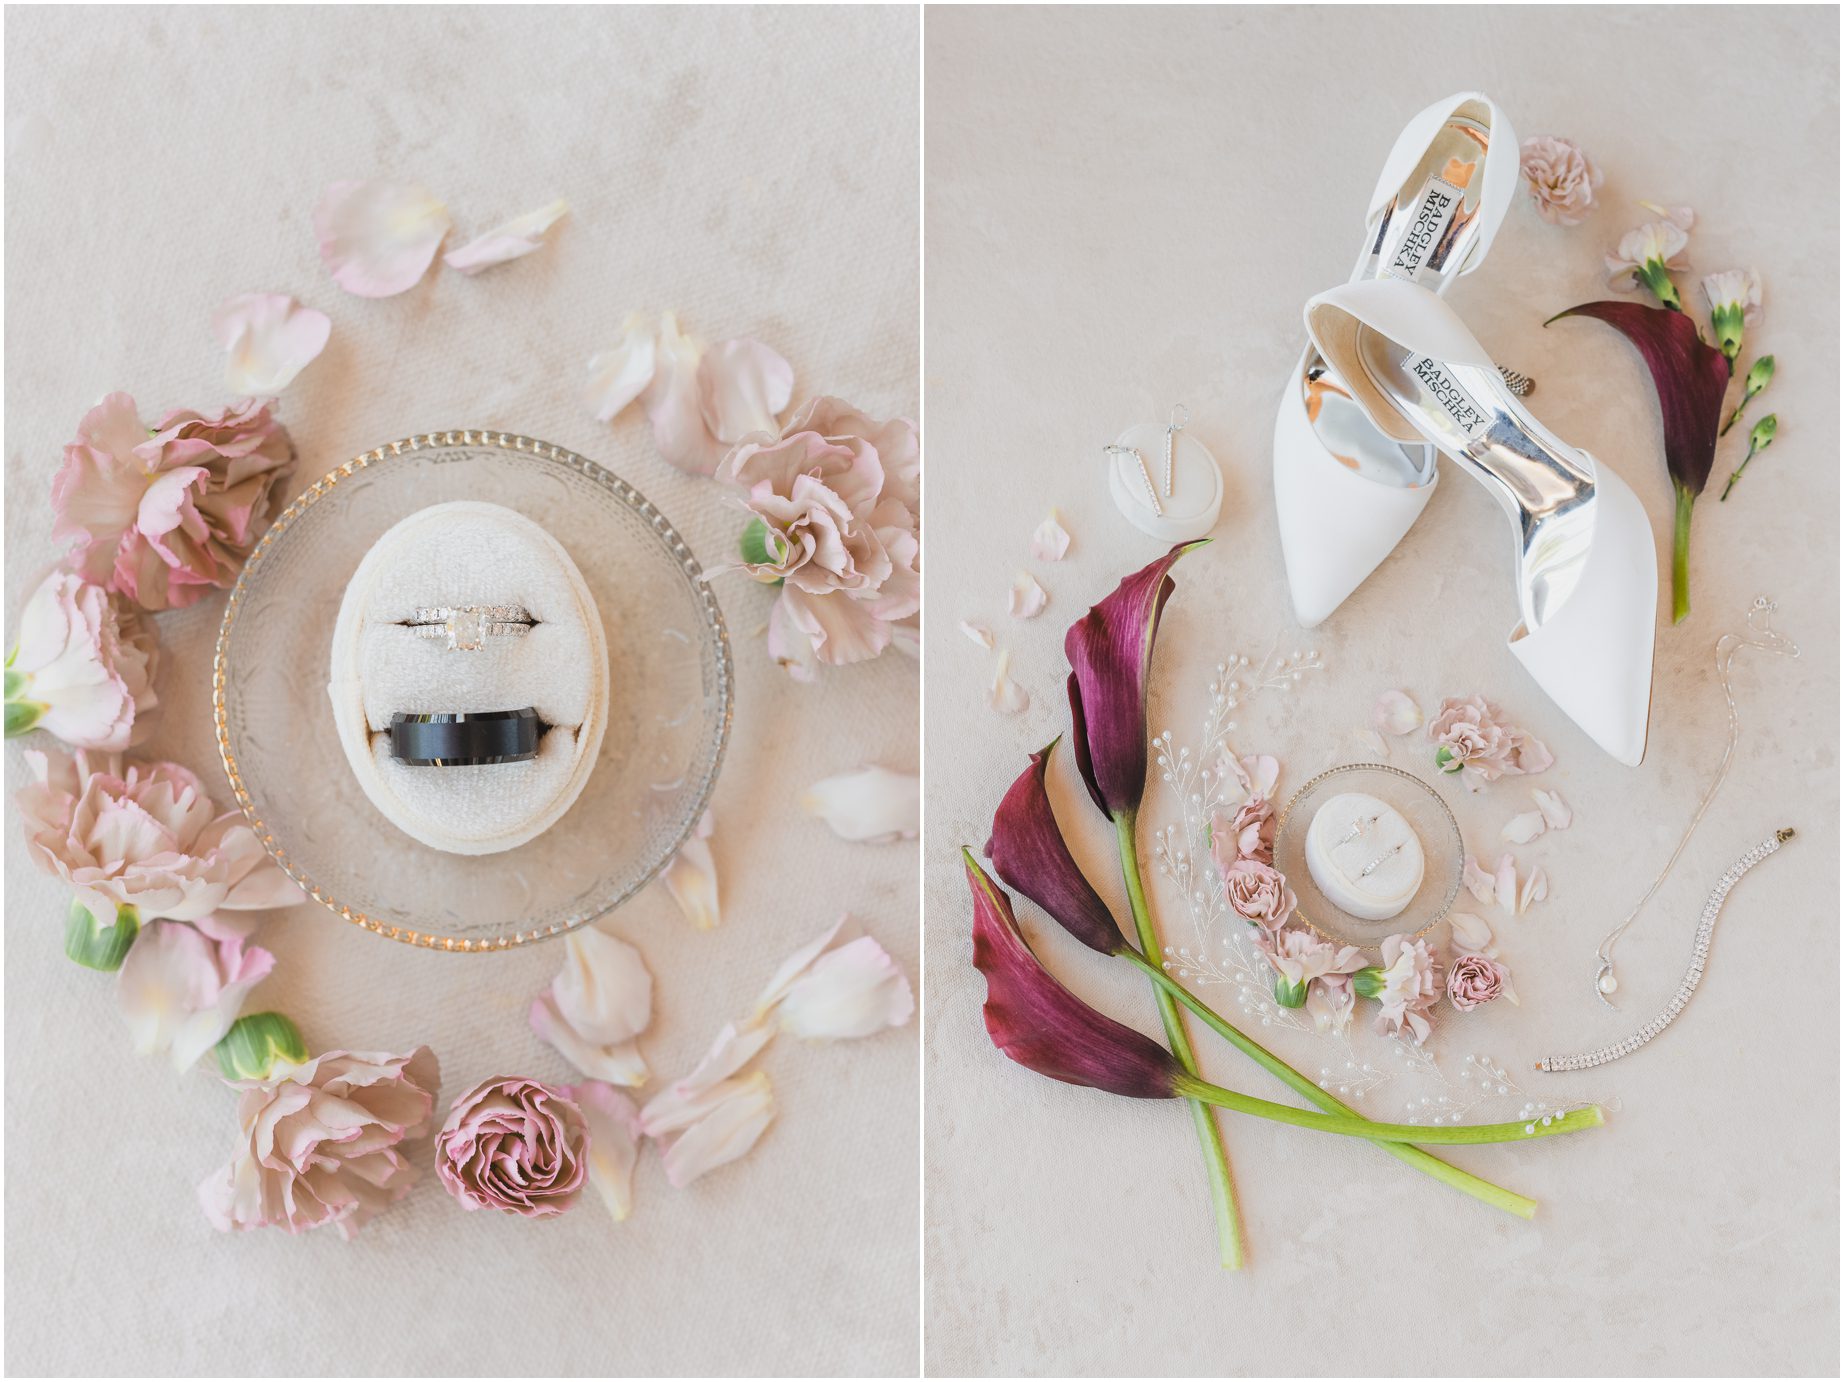 Wedding details featuring wedding rings, pink and white carnations, and white badgley Mischka wedding shoes